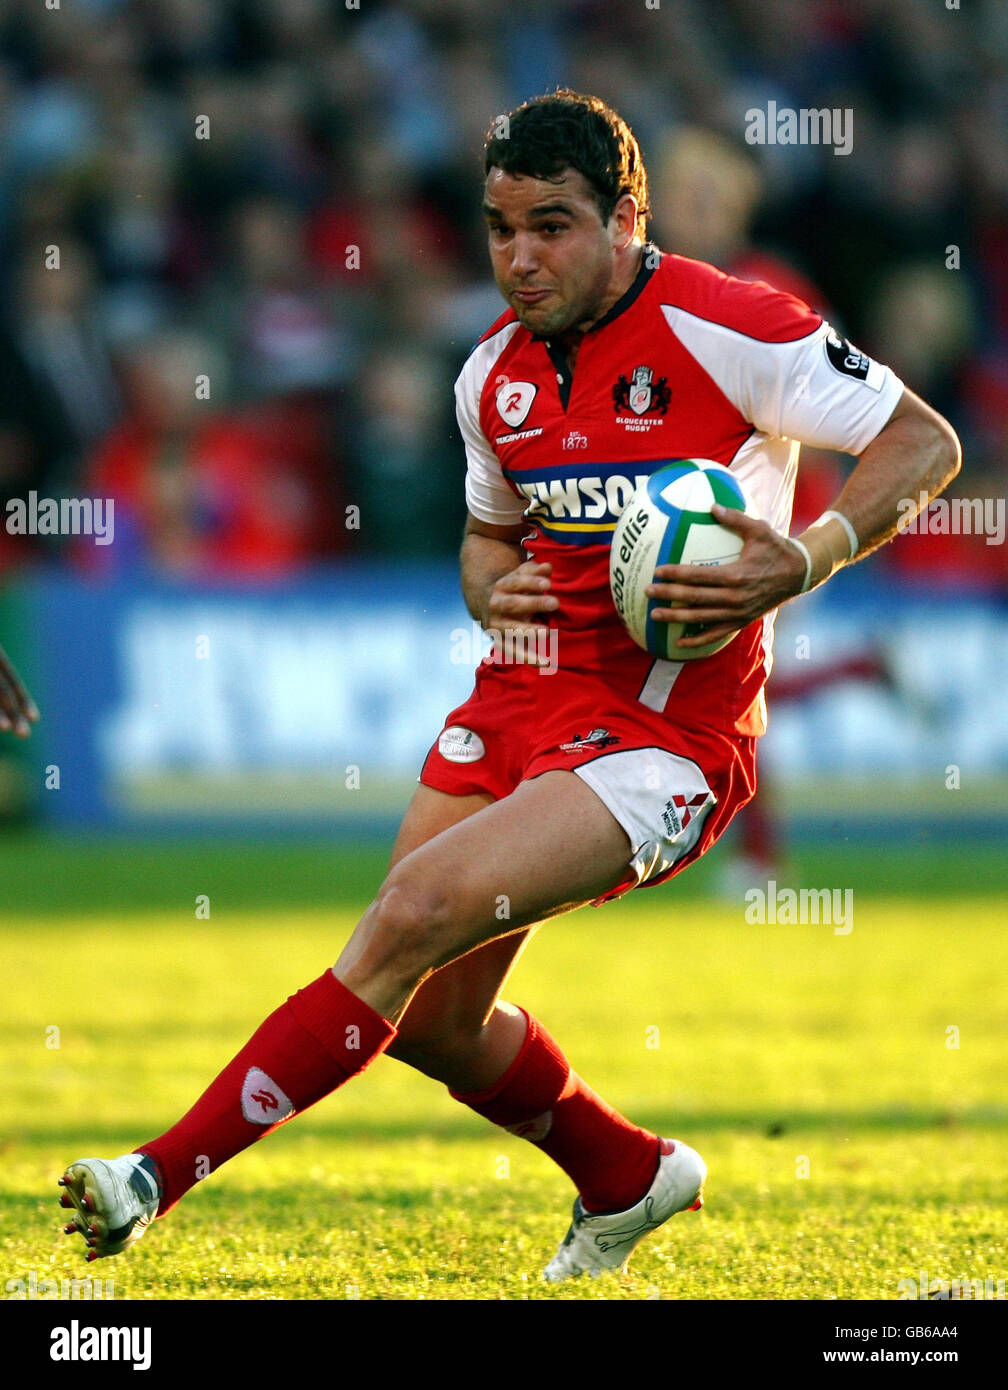 Rugby-Union - Heineken Cup - Gloucester Rugby V Biarritz Olympique Pays Basque - Kingsholm Stadium Stockfoto